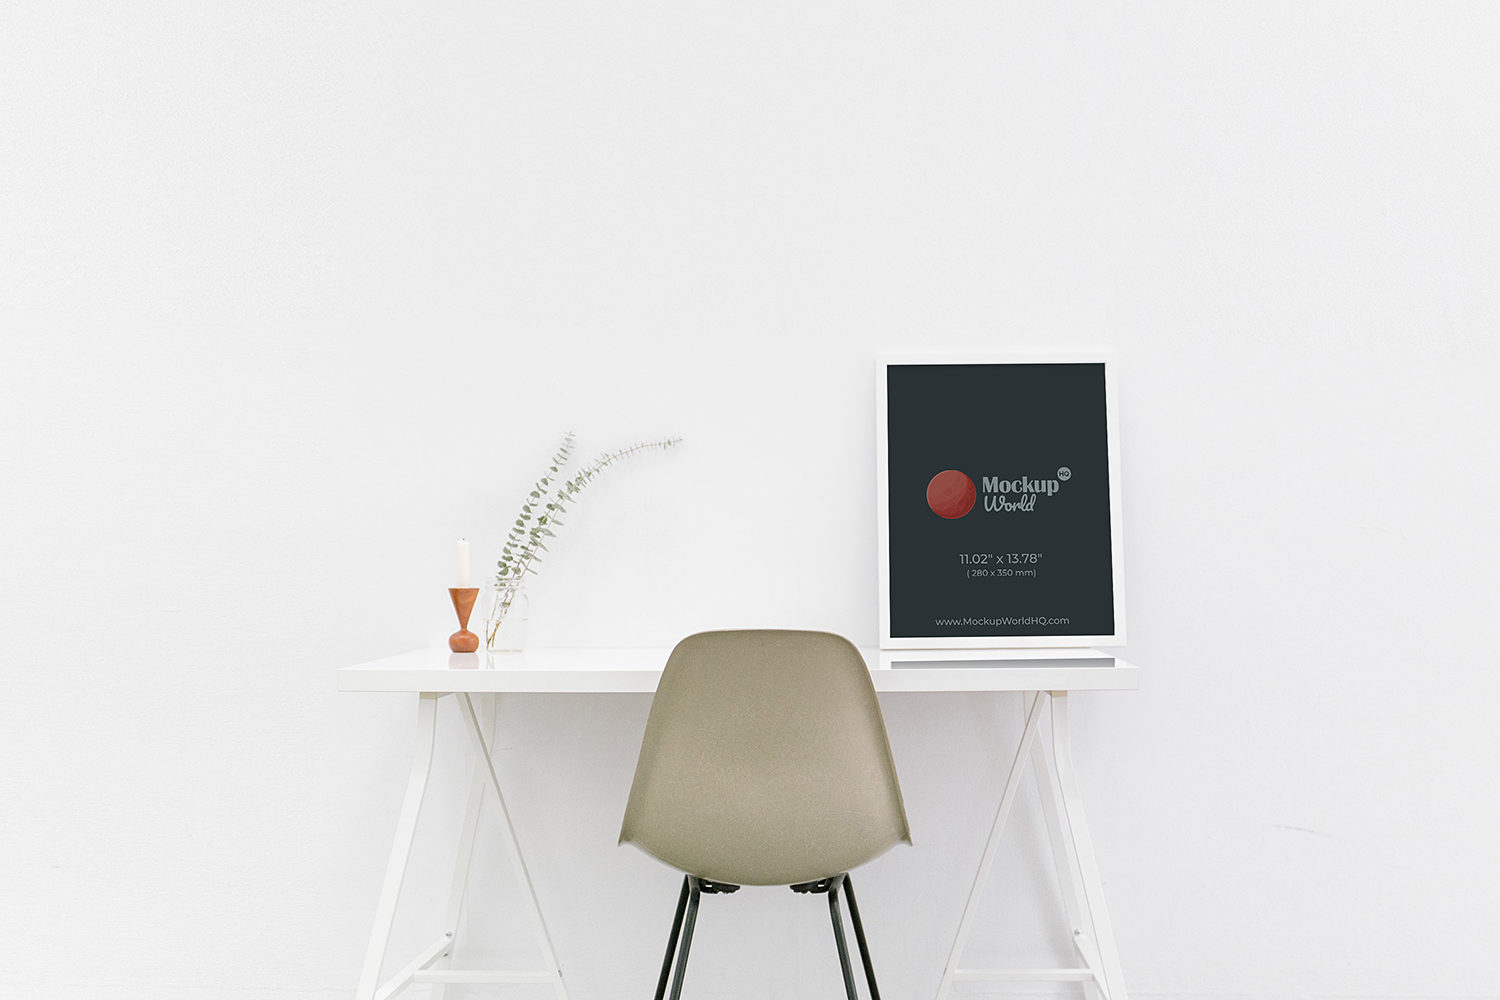 White Photo Frame Mockup on a Table in Minimalist Interior